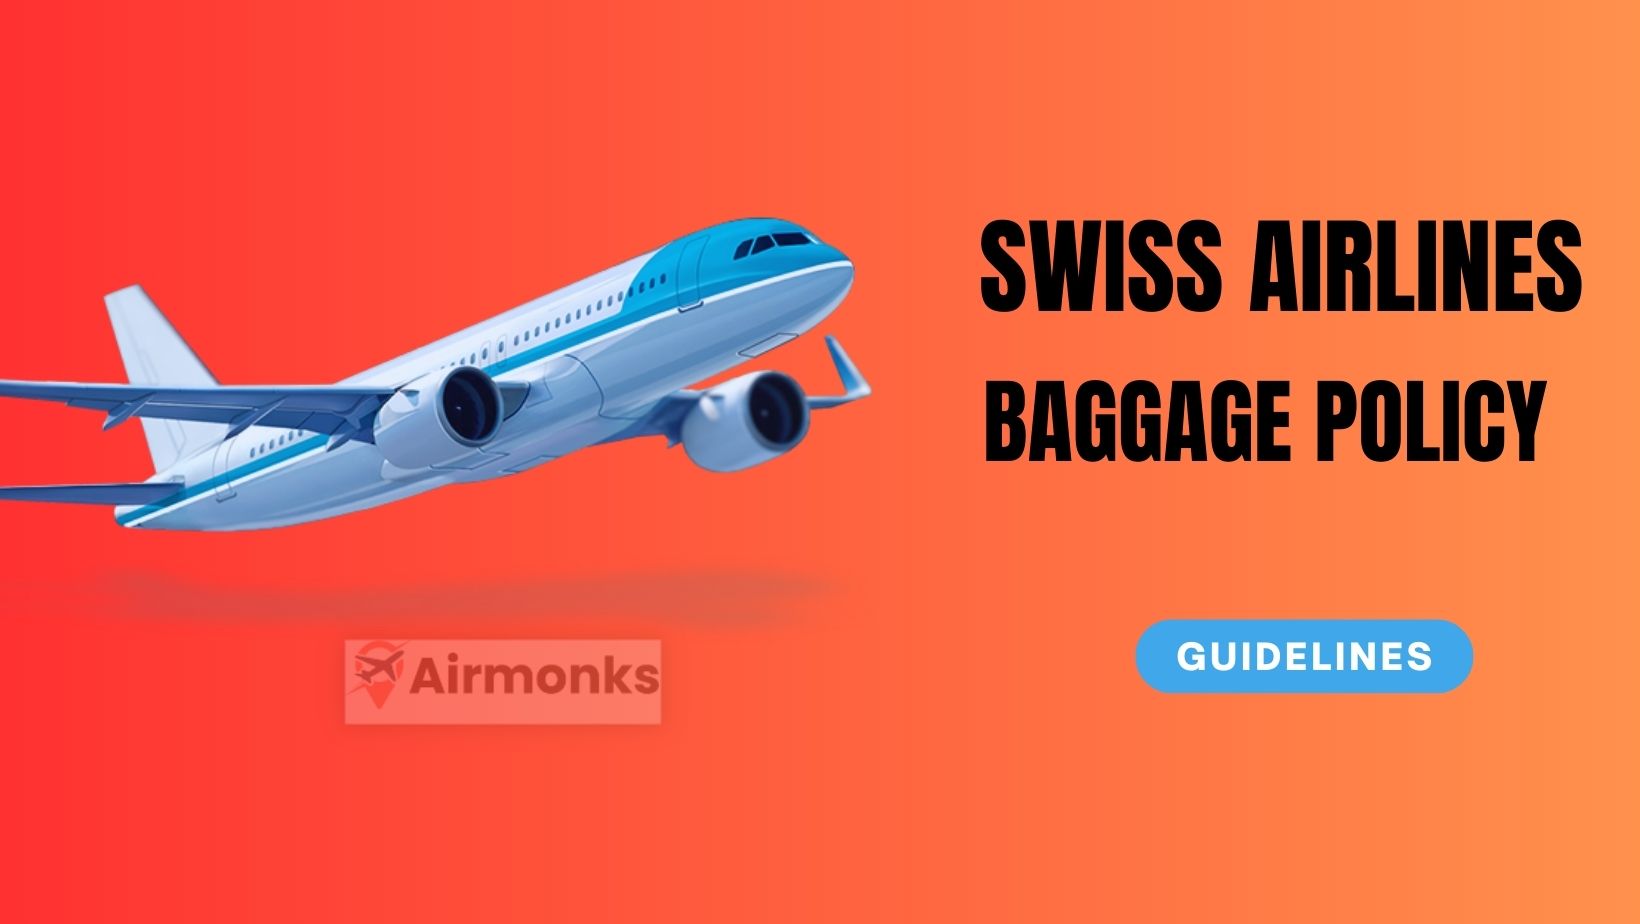 swiss airlines baggage policy64784dac495b2.jpg